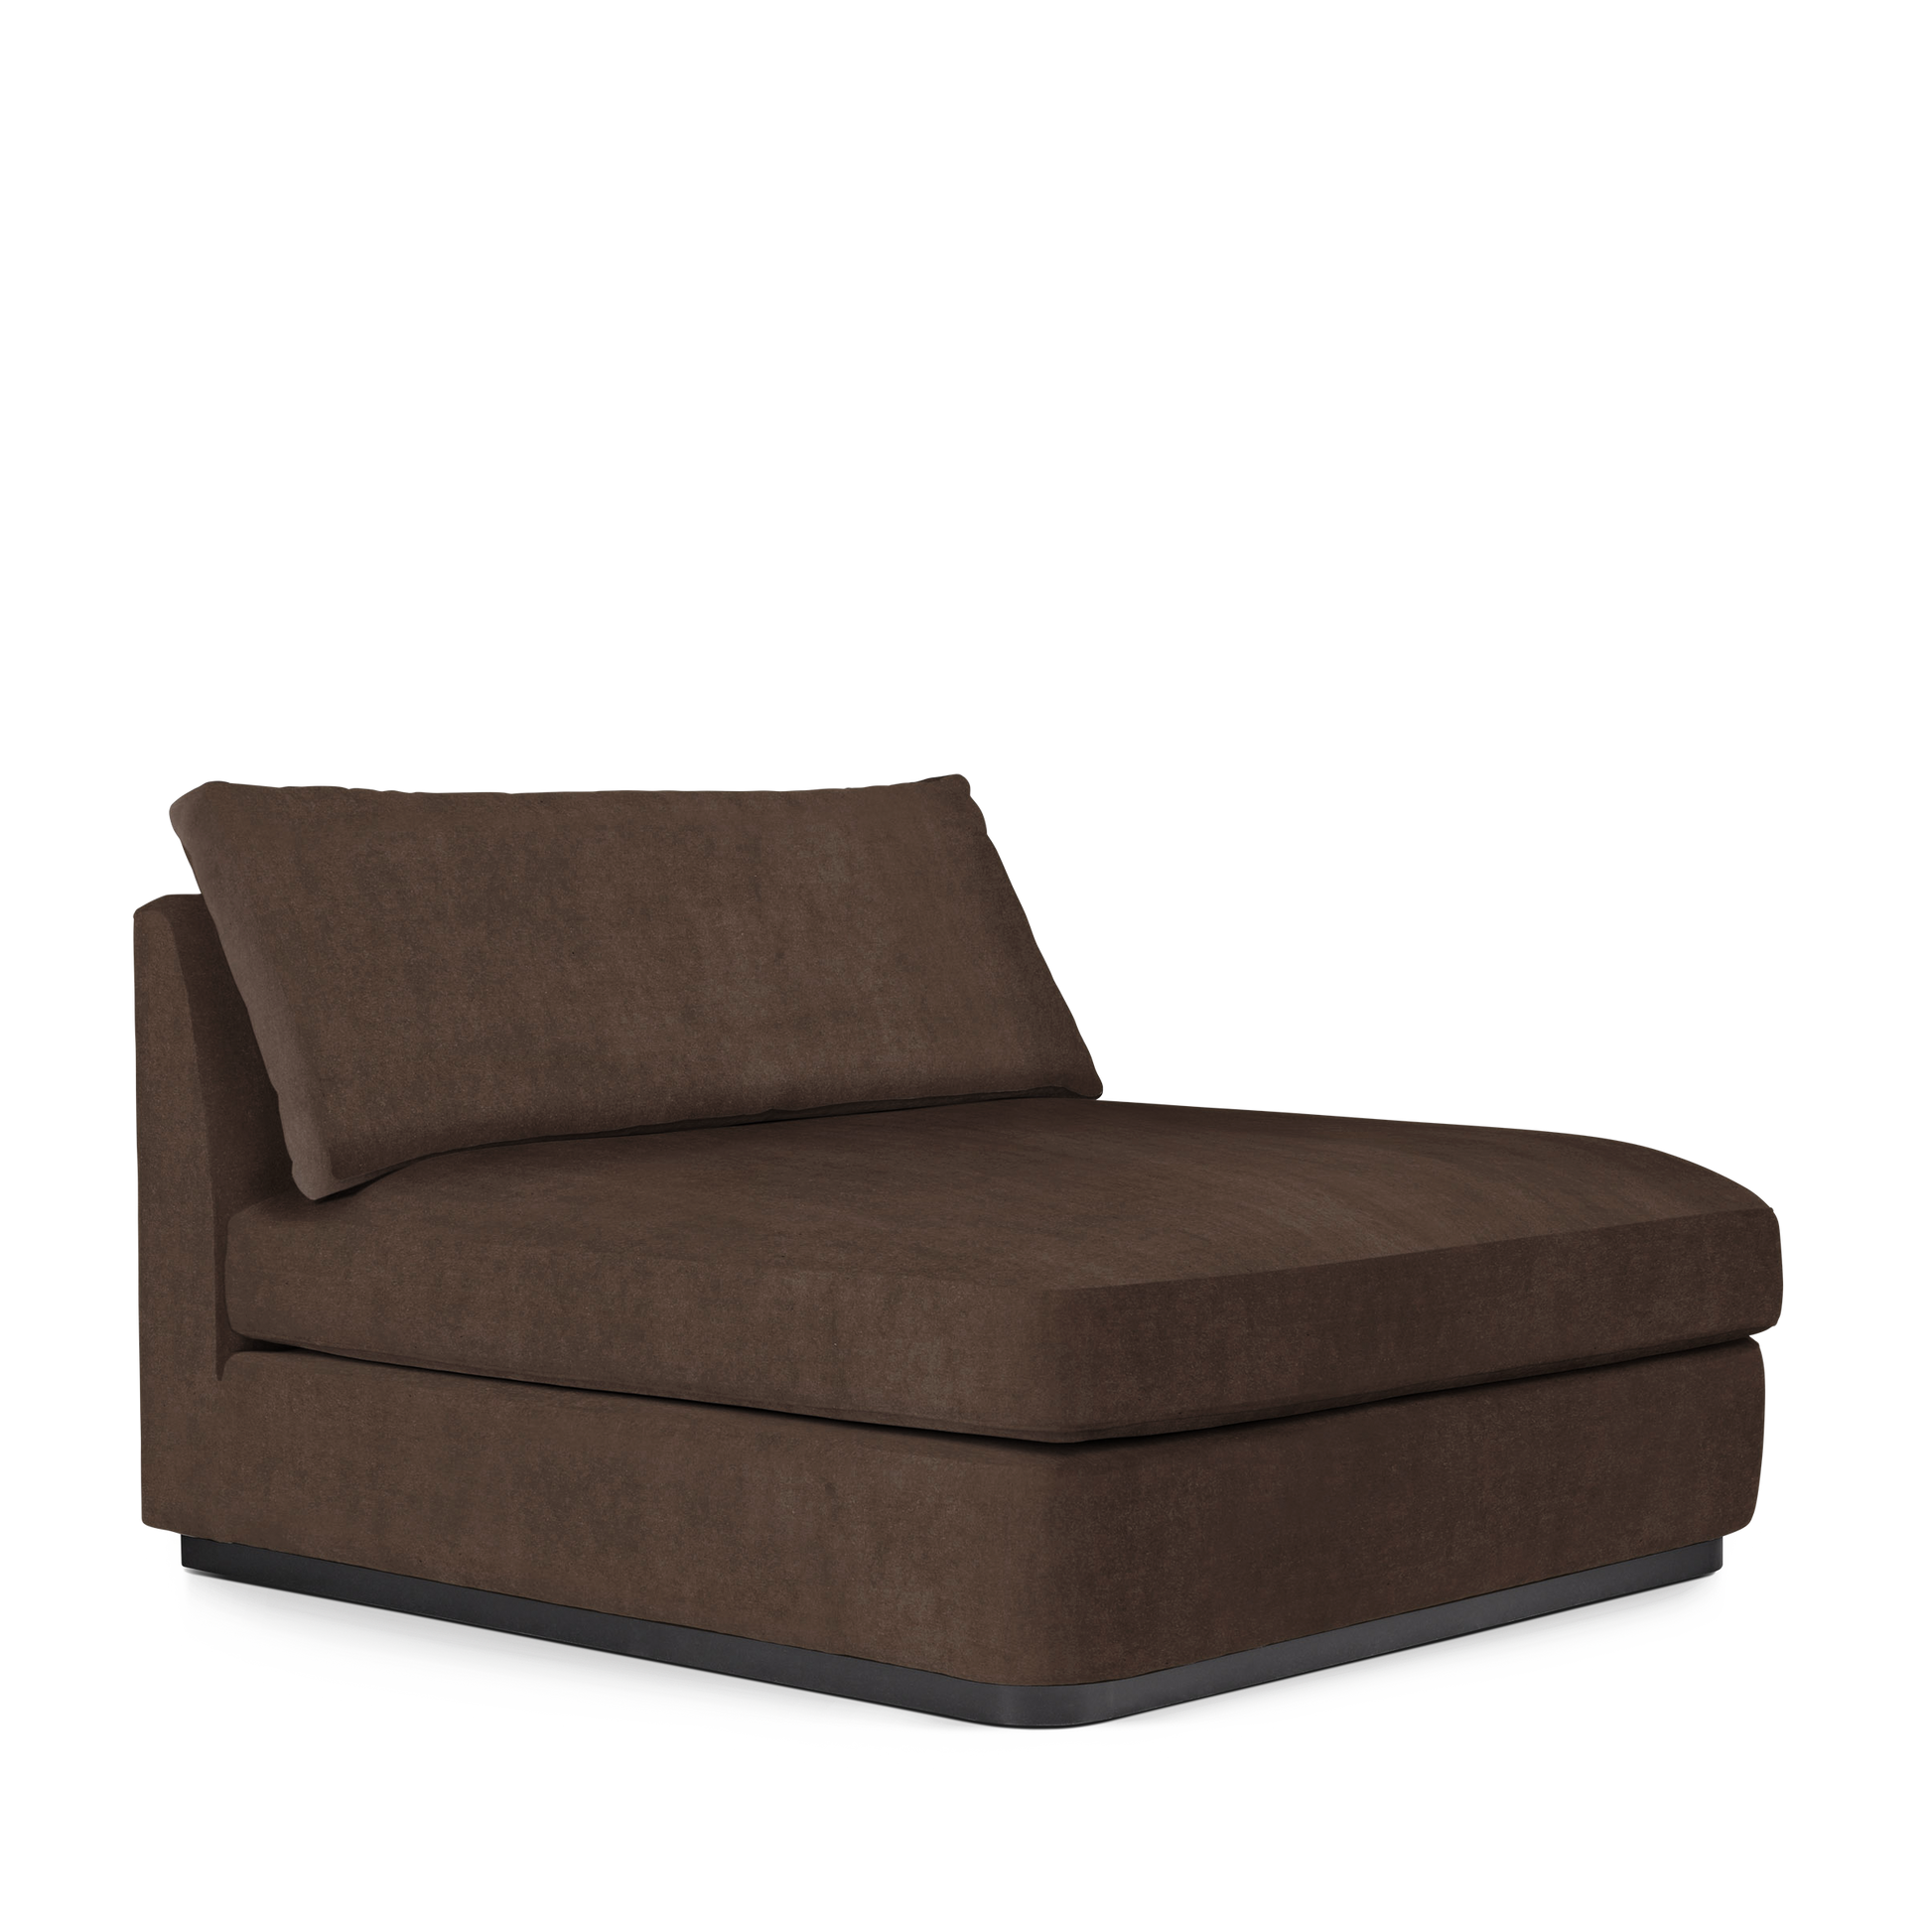 CALMA Lounge Bed with suede brown textile 